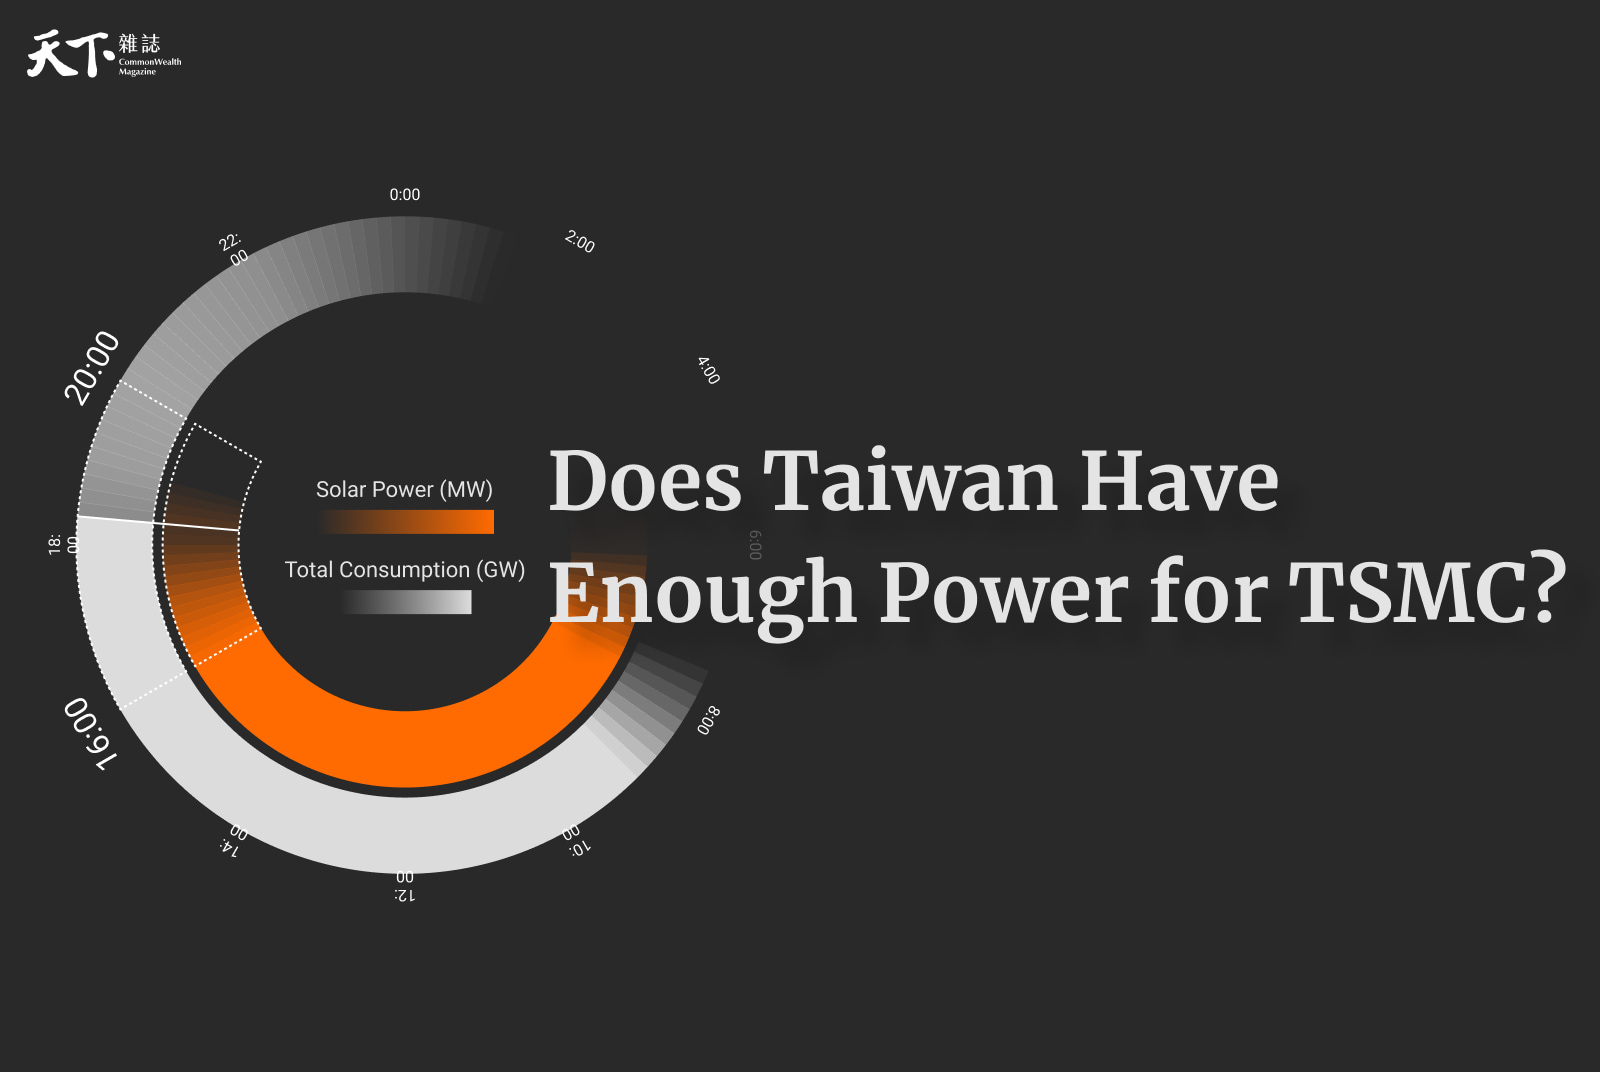 Does Taiwan have enough power for TSMC?